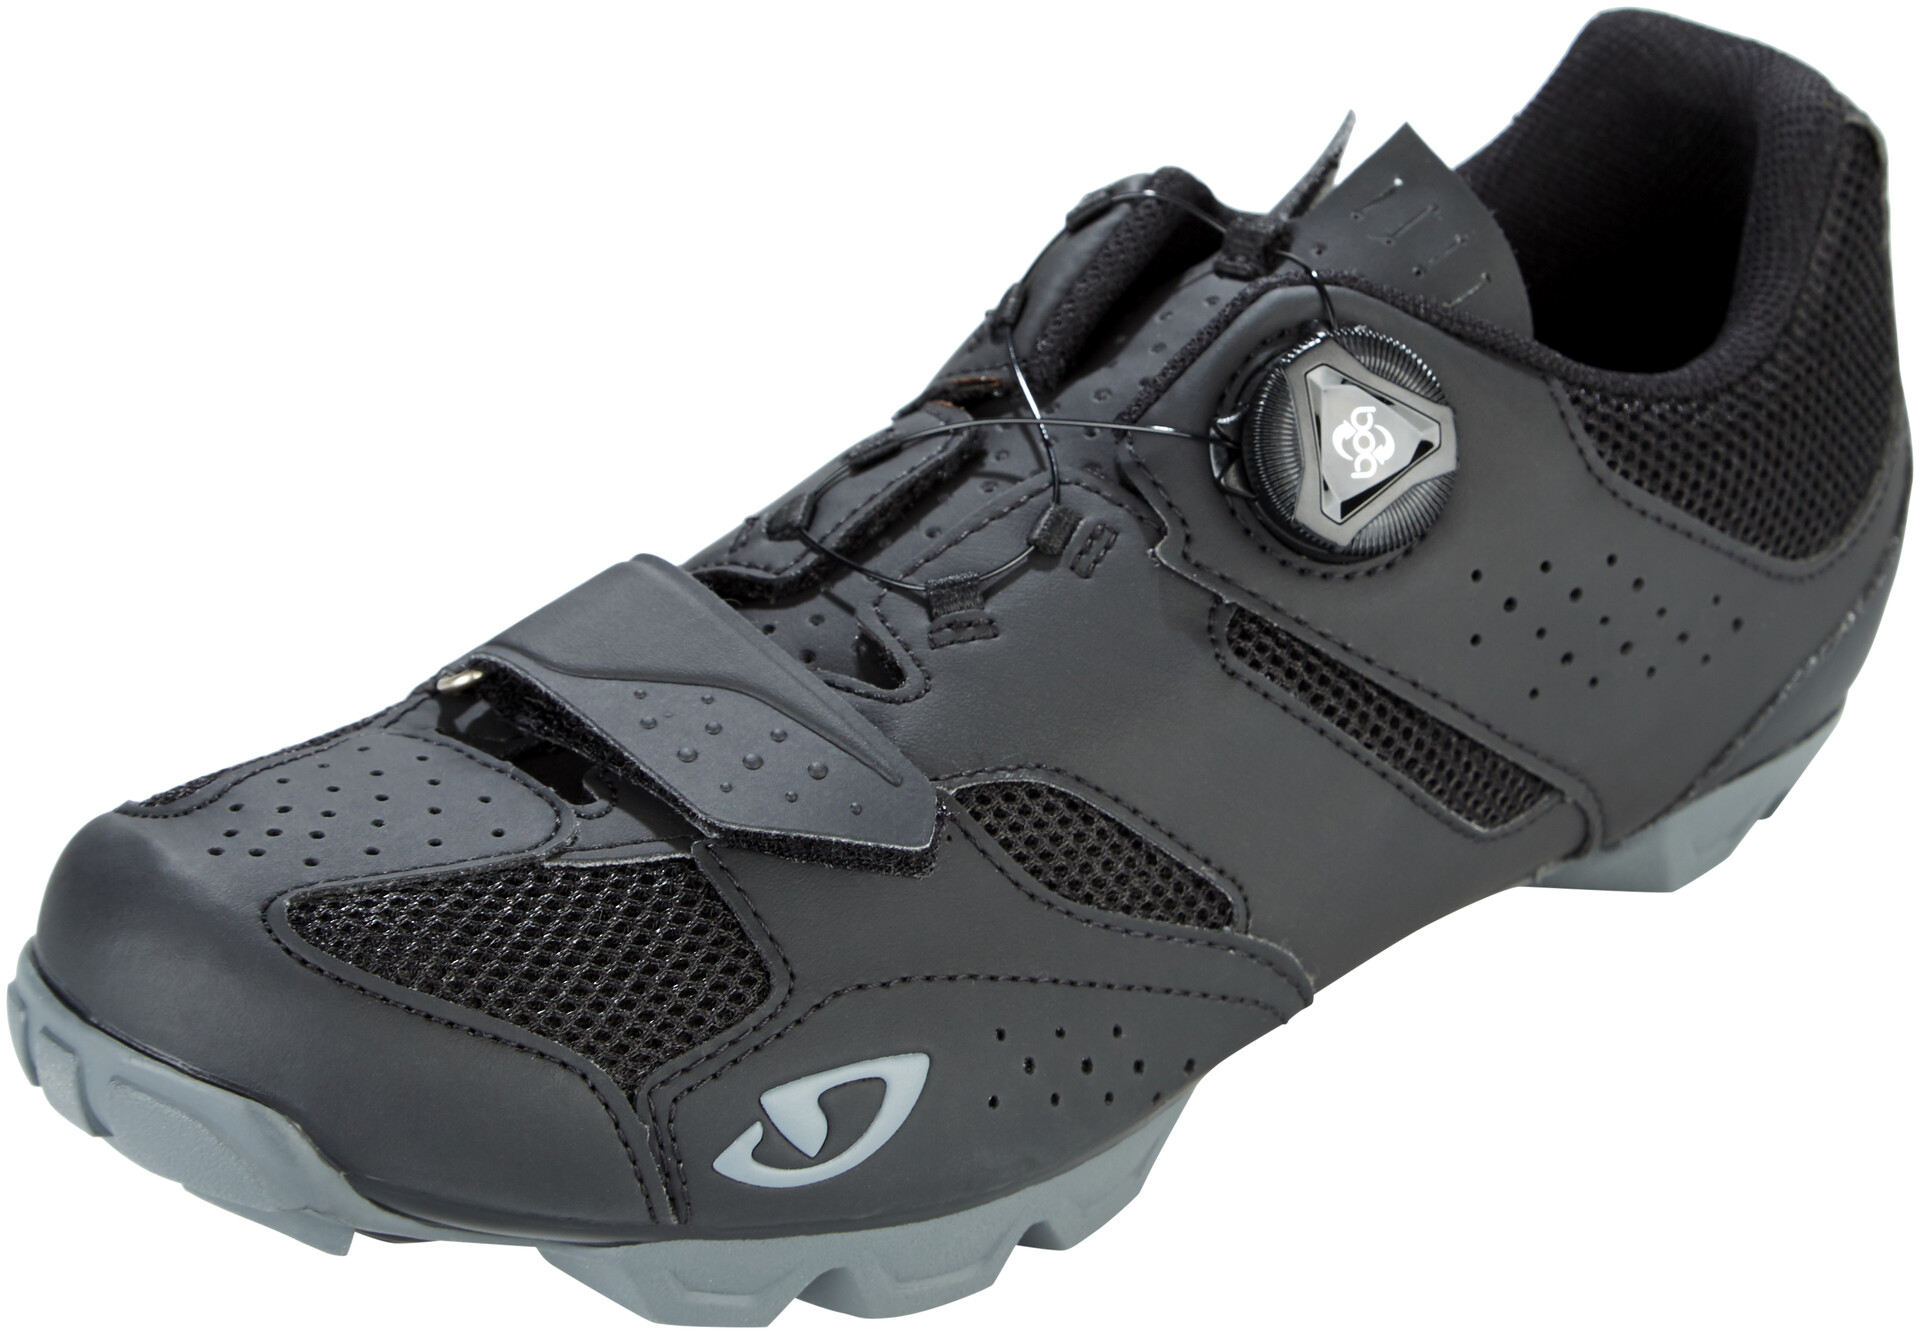 Giro Privateer R Chaussures Noir Taille 45 2018 Vélo Chaussures